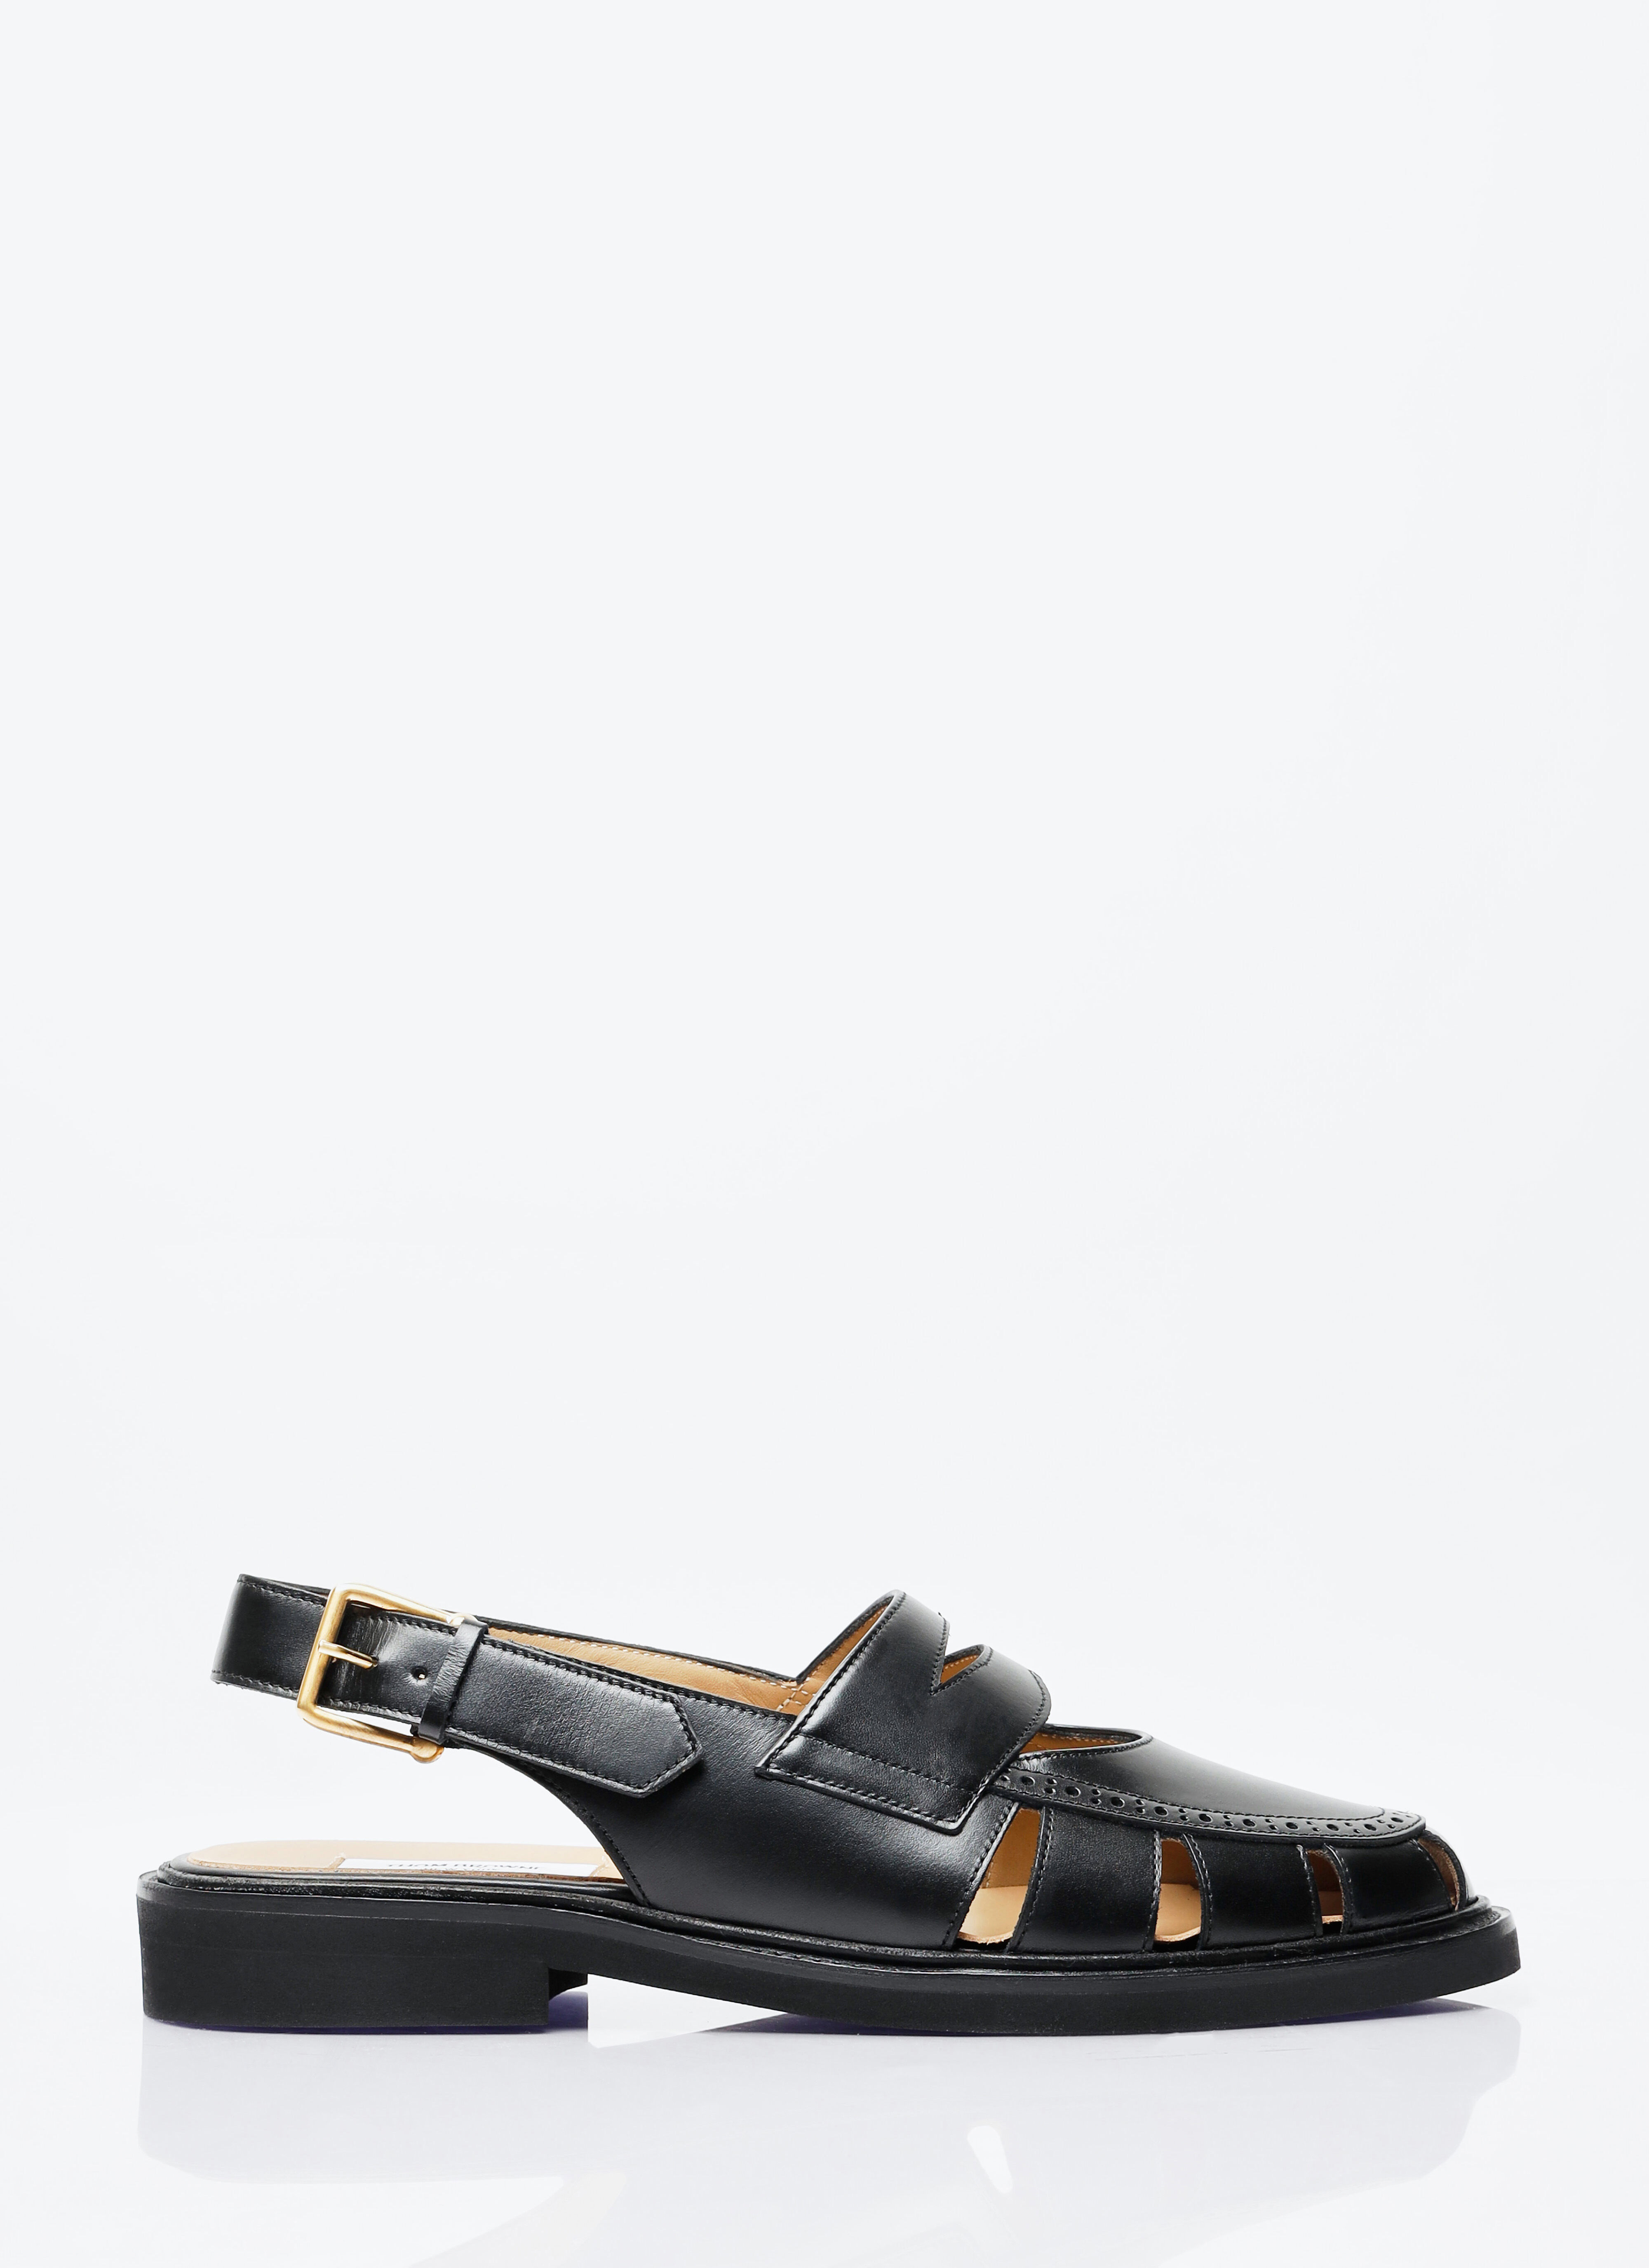 Thom Browne Cut-Out Slingback Loafer Sandals Grey thb0156006